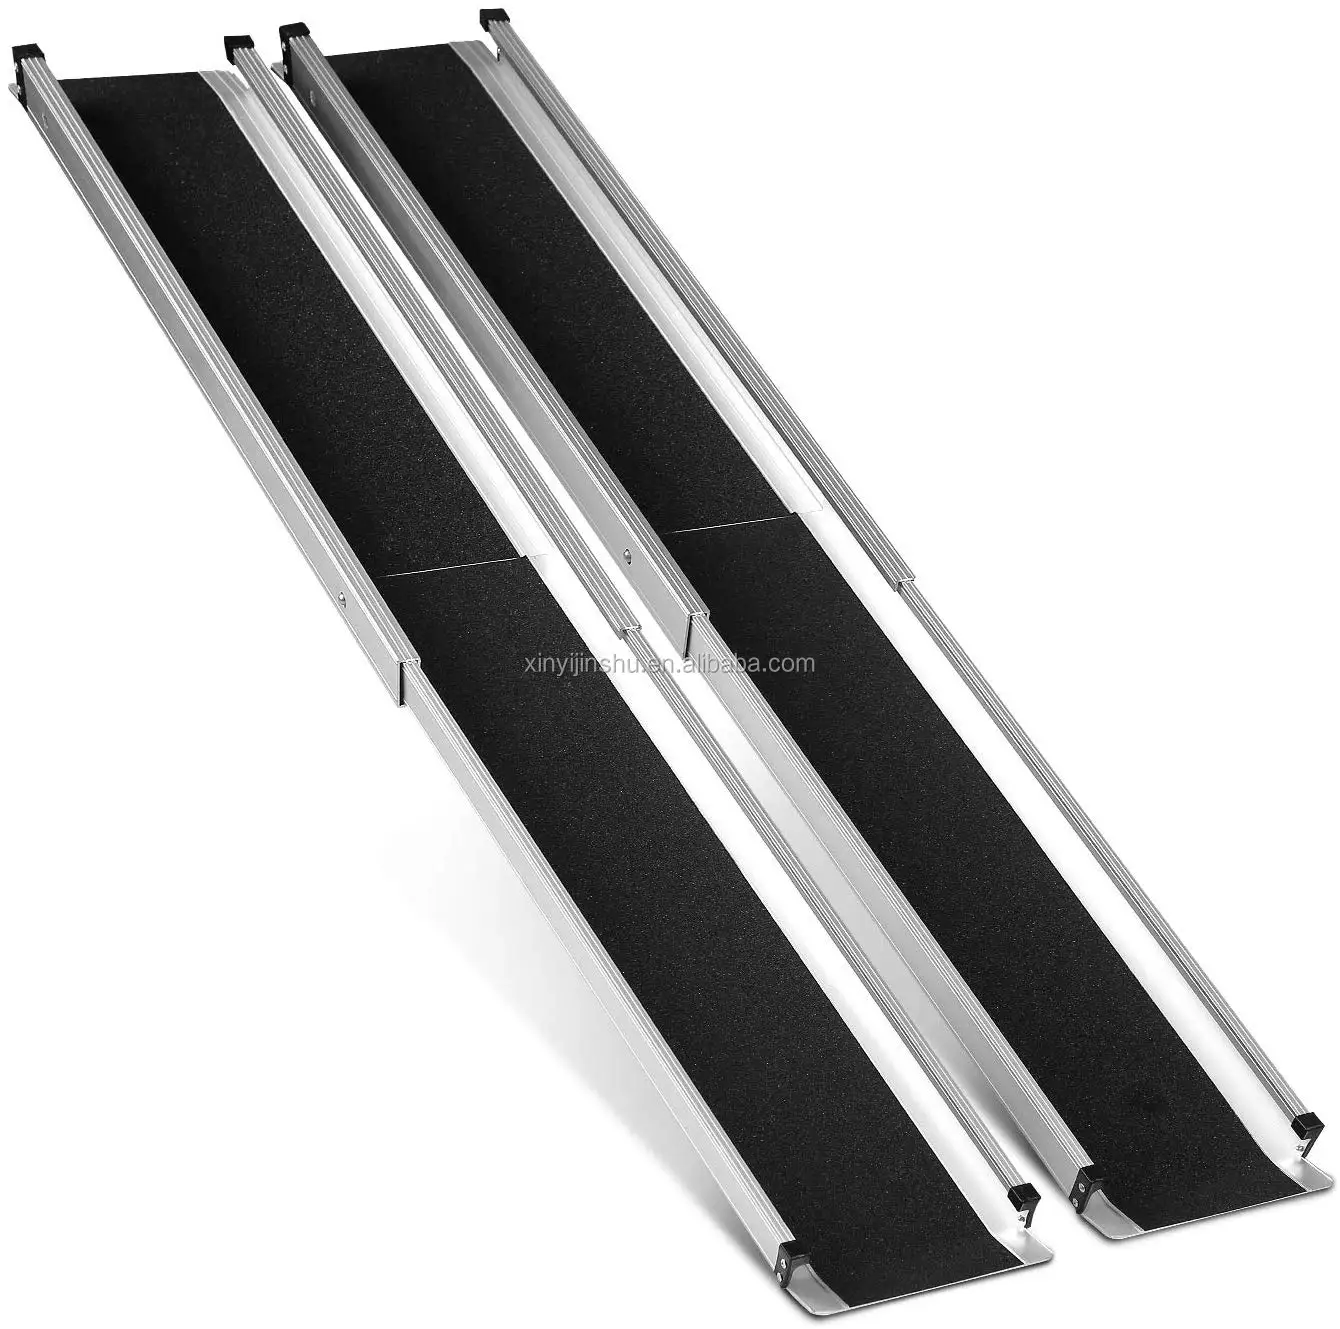 Lightweight Aluminium Telescopic Portable Wheelchair Ramps Folding Mobility Scooter Ramp For